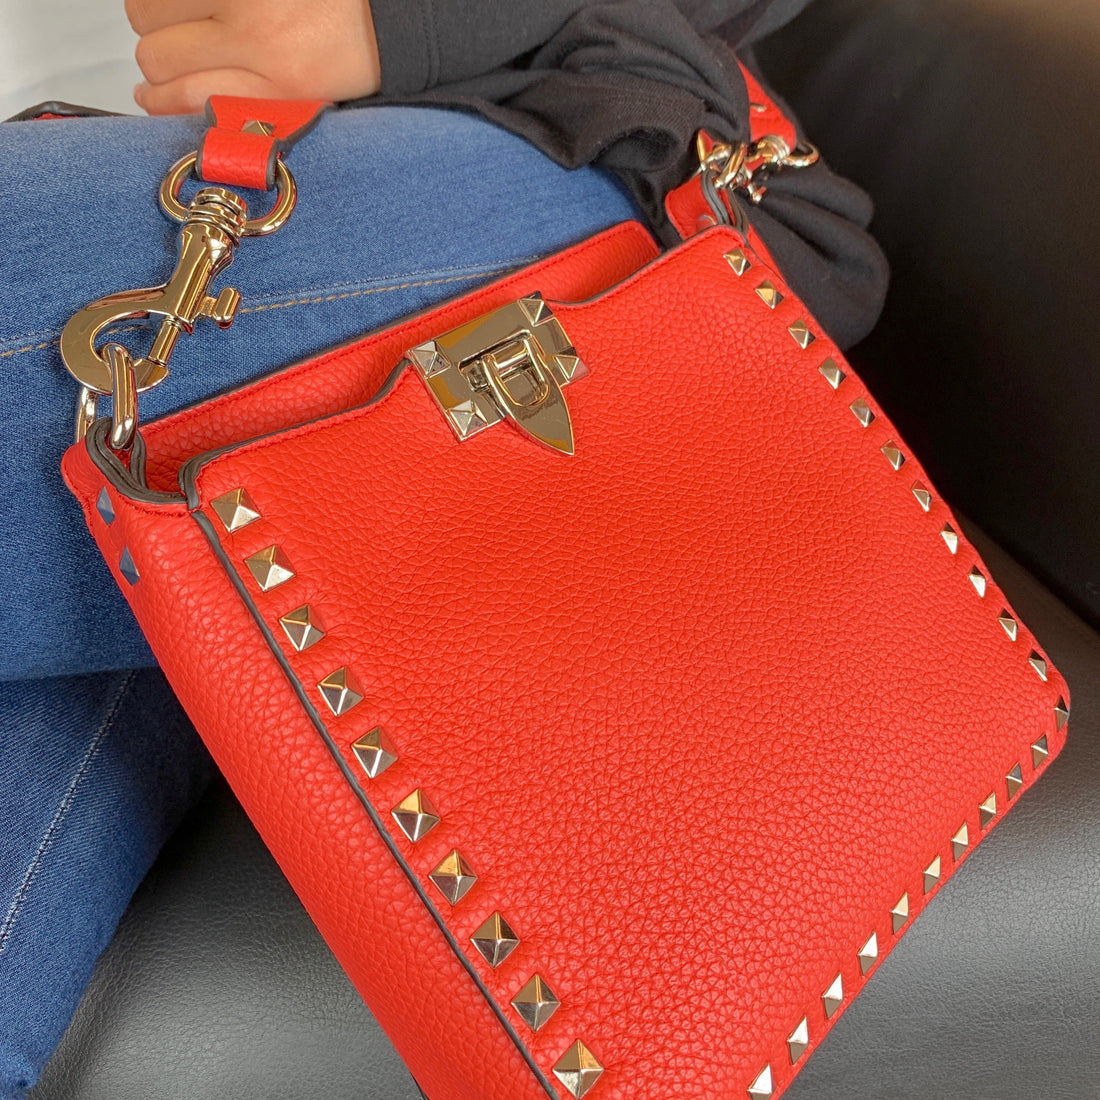 Studded Bags and More